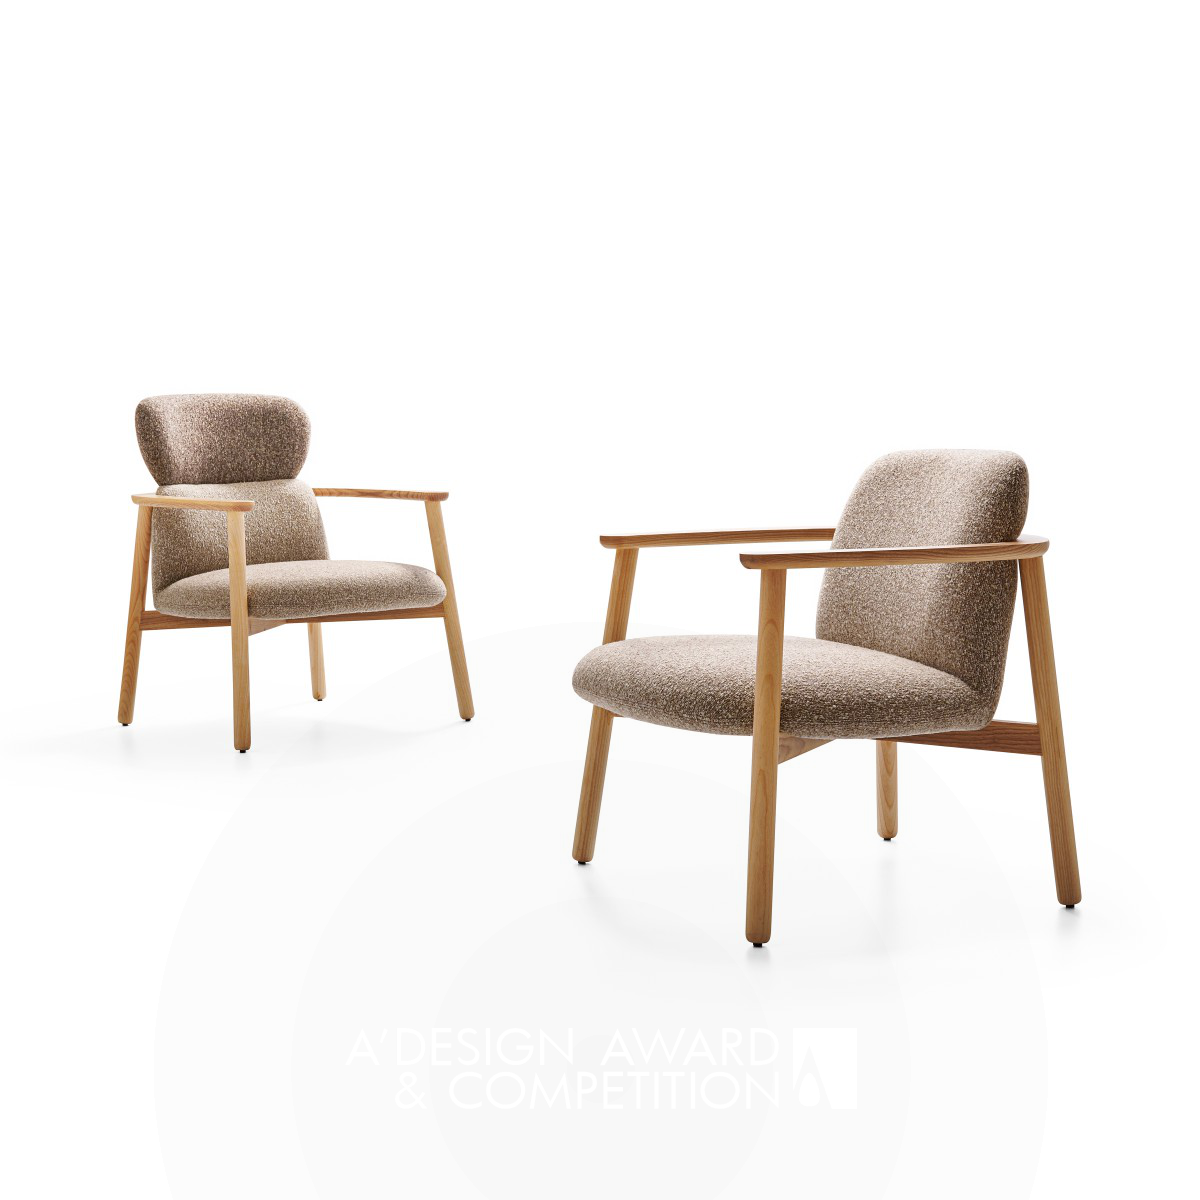 Emre Oner wins Bronze at the prestigious A' Furniture Design Award with Well&#039;s Lounge Chair.